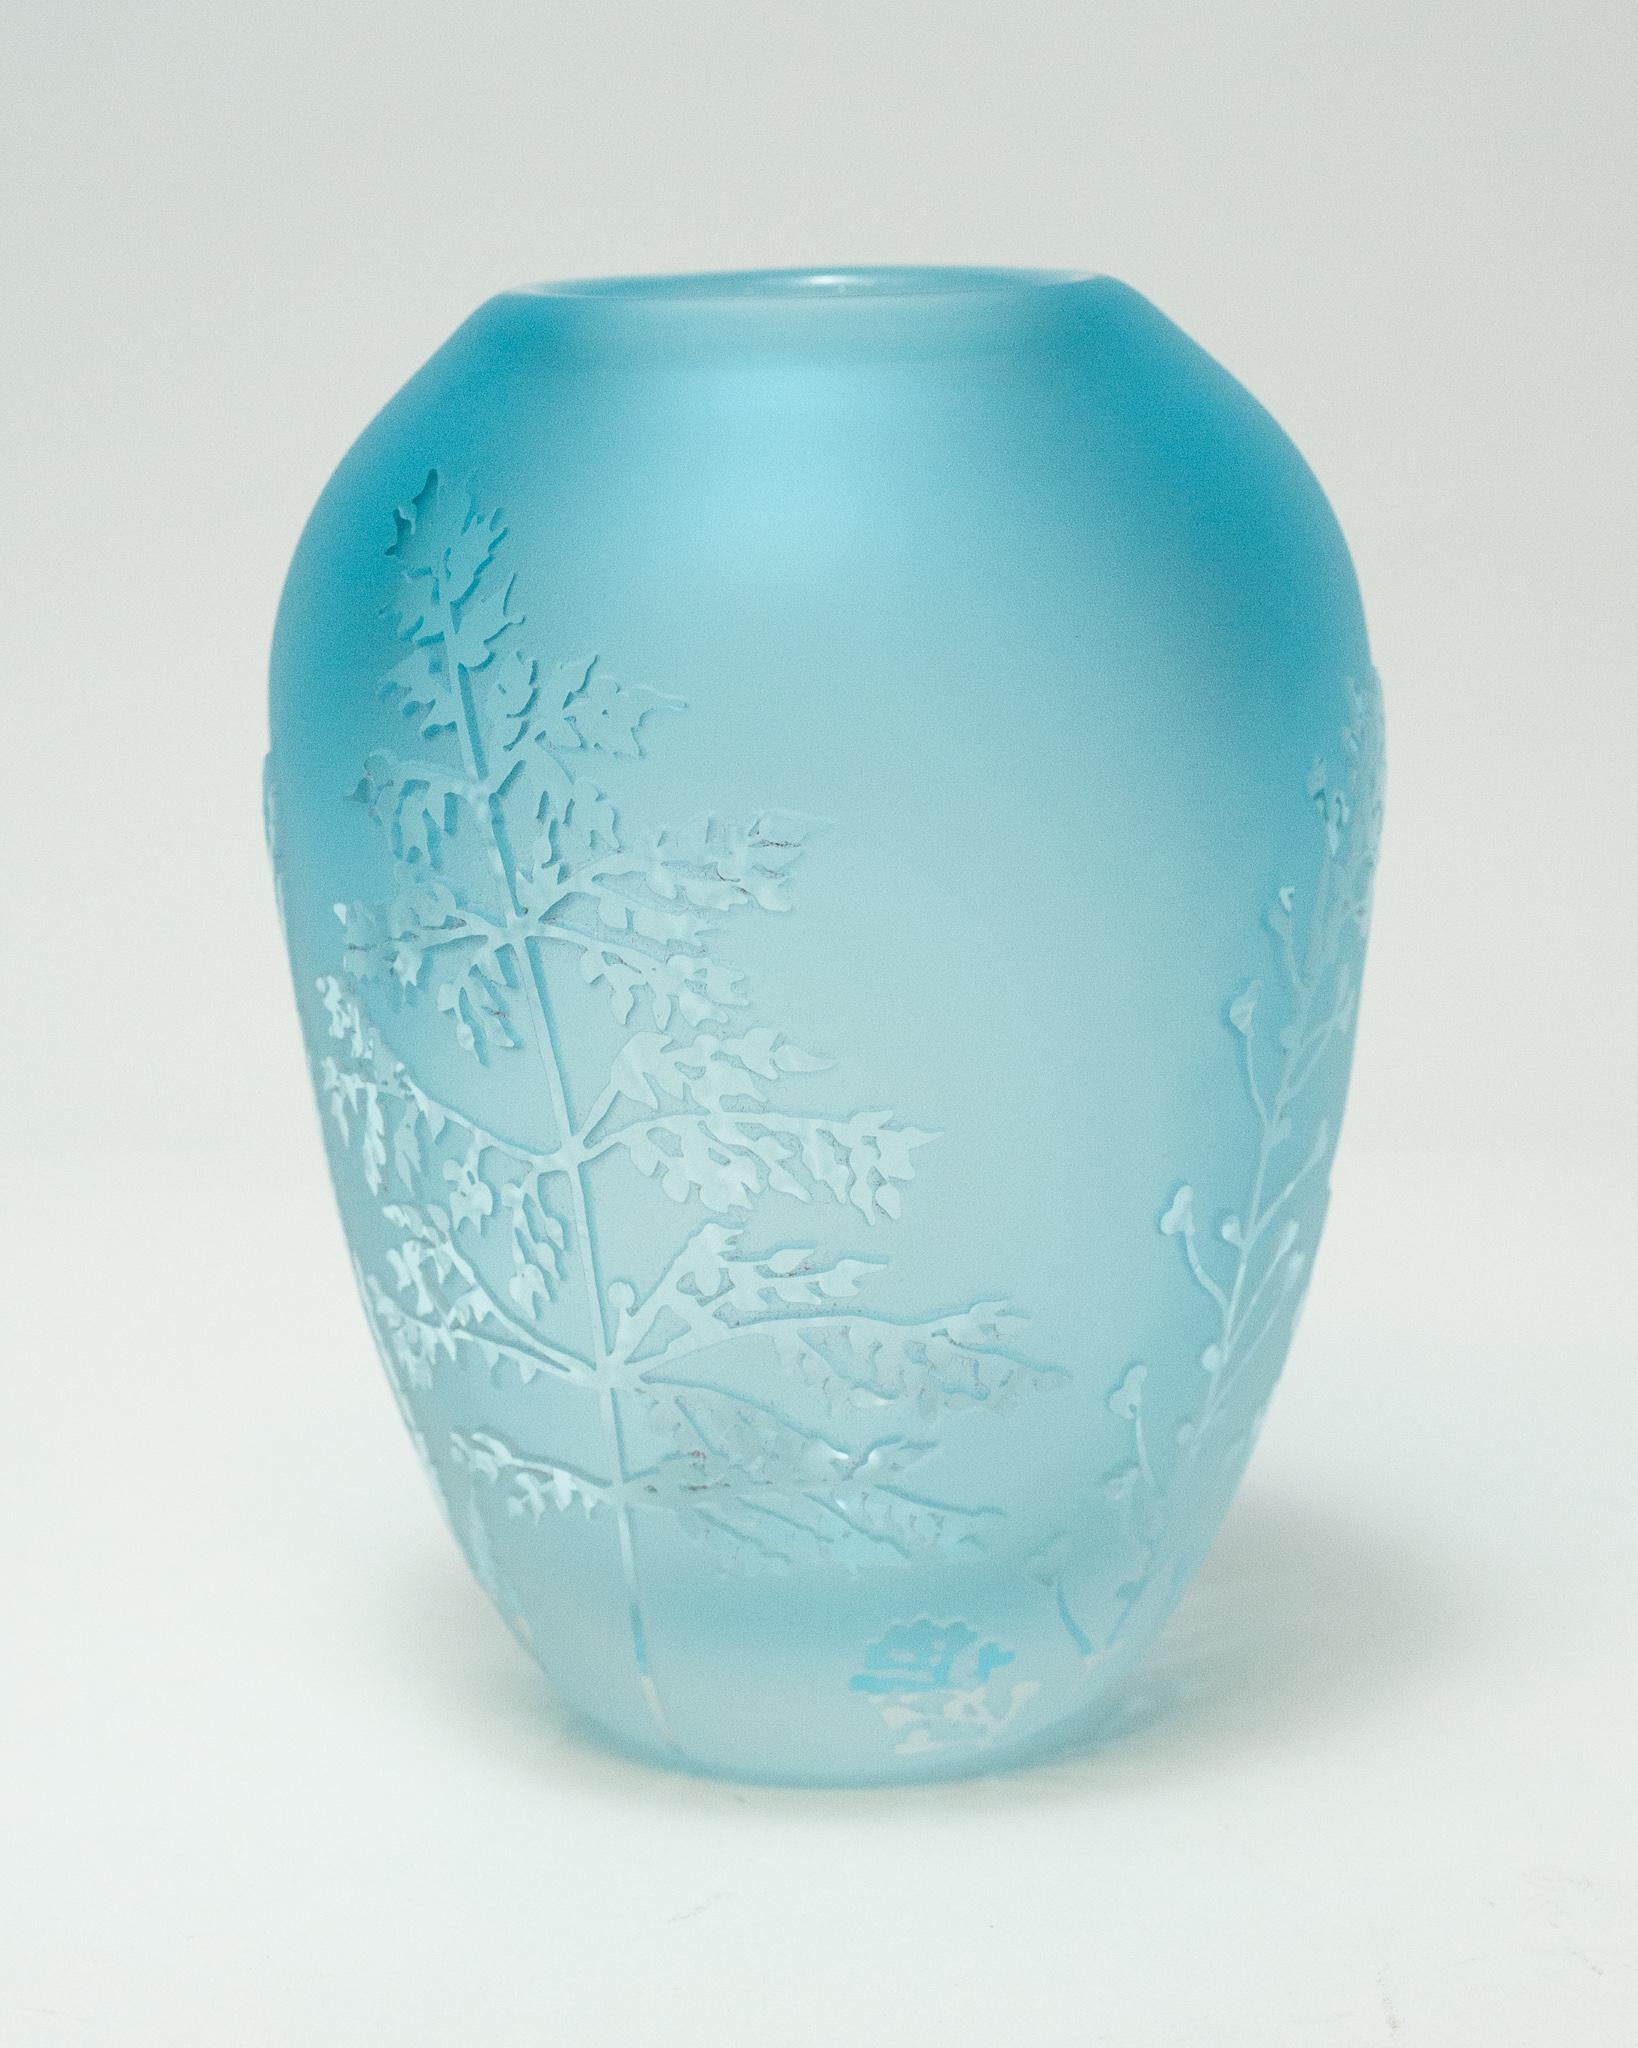 A stunning contemporary blue blown glass vase with sandblasted surface and raised cut glass botanical motifs by a Canadian artist.